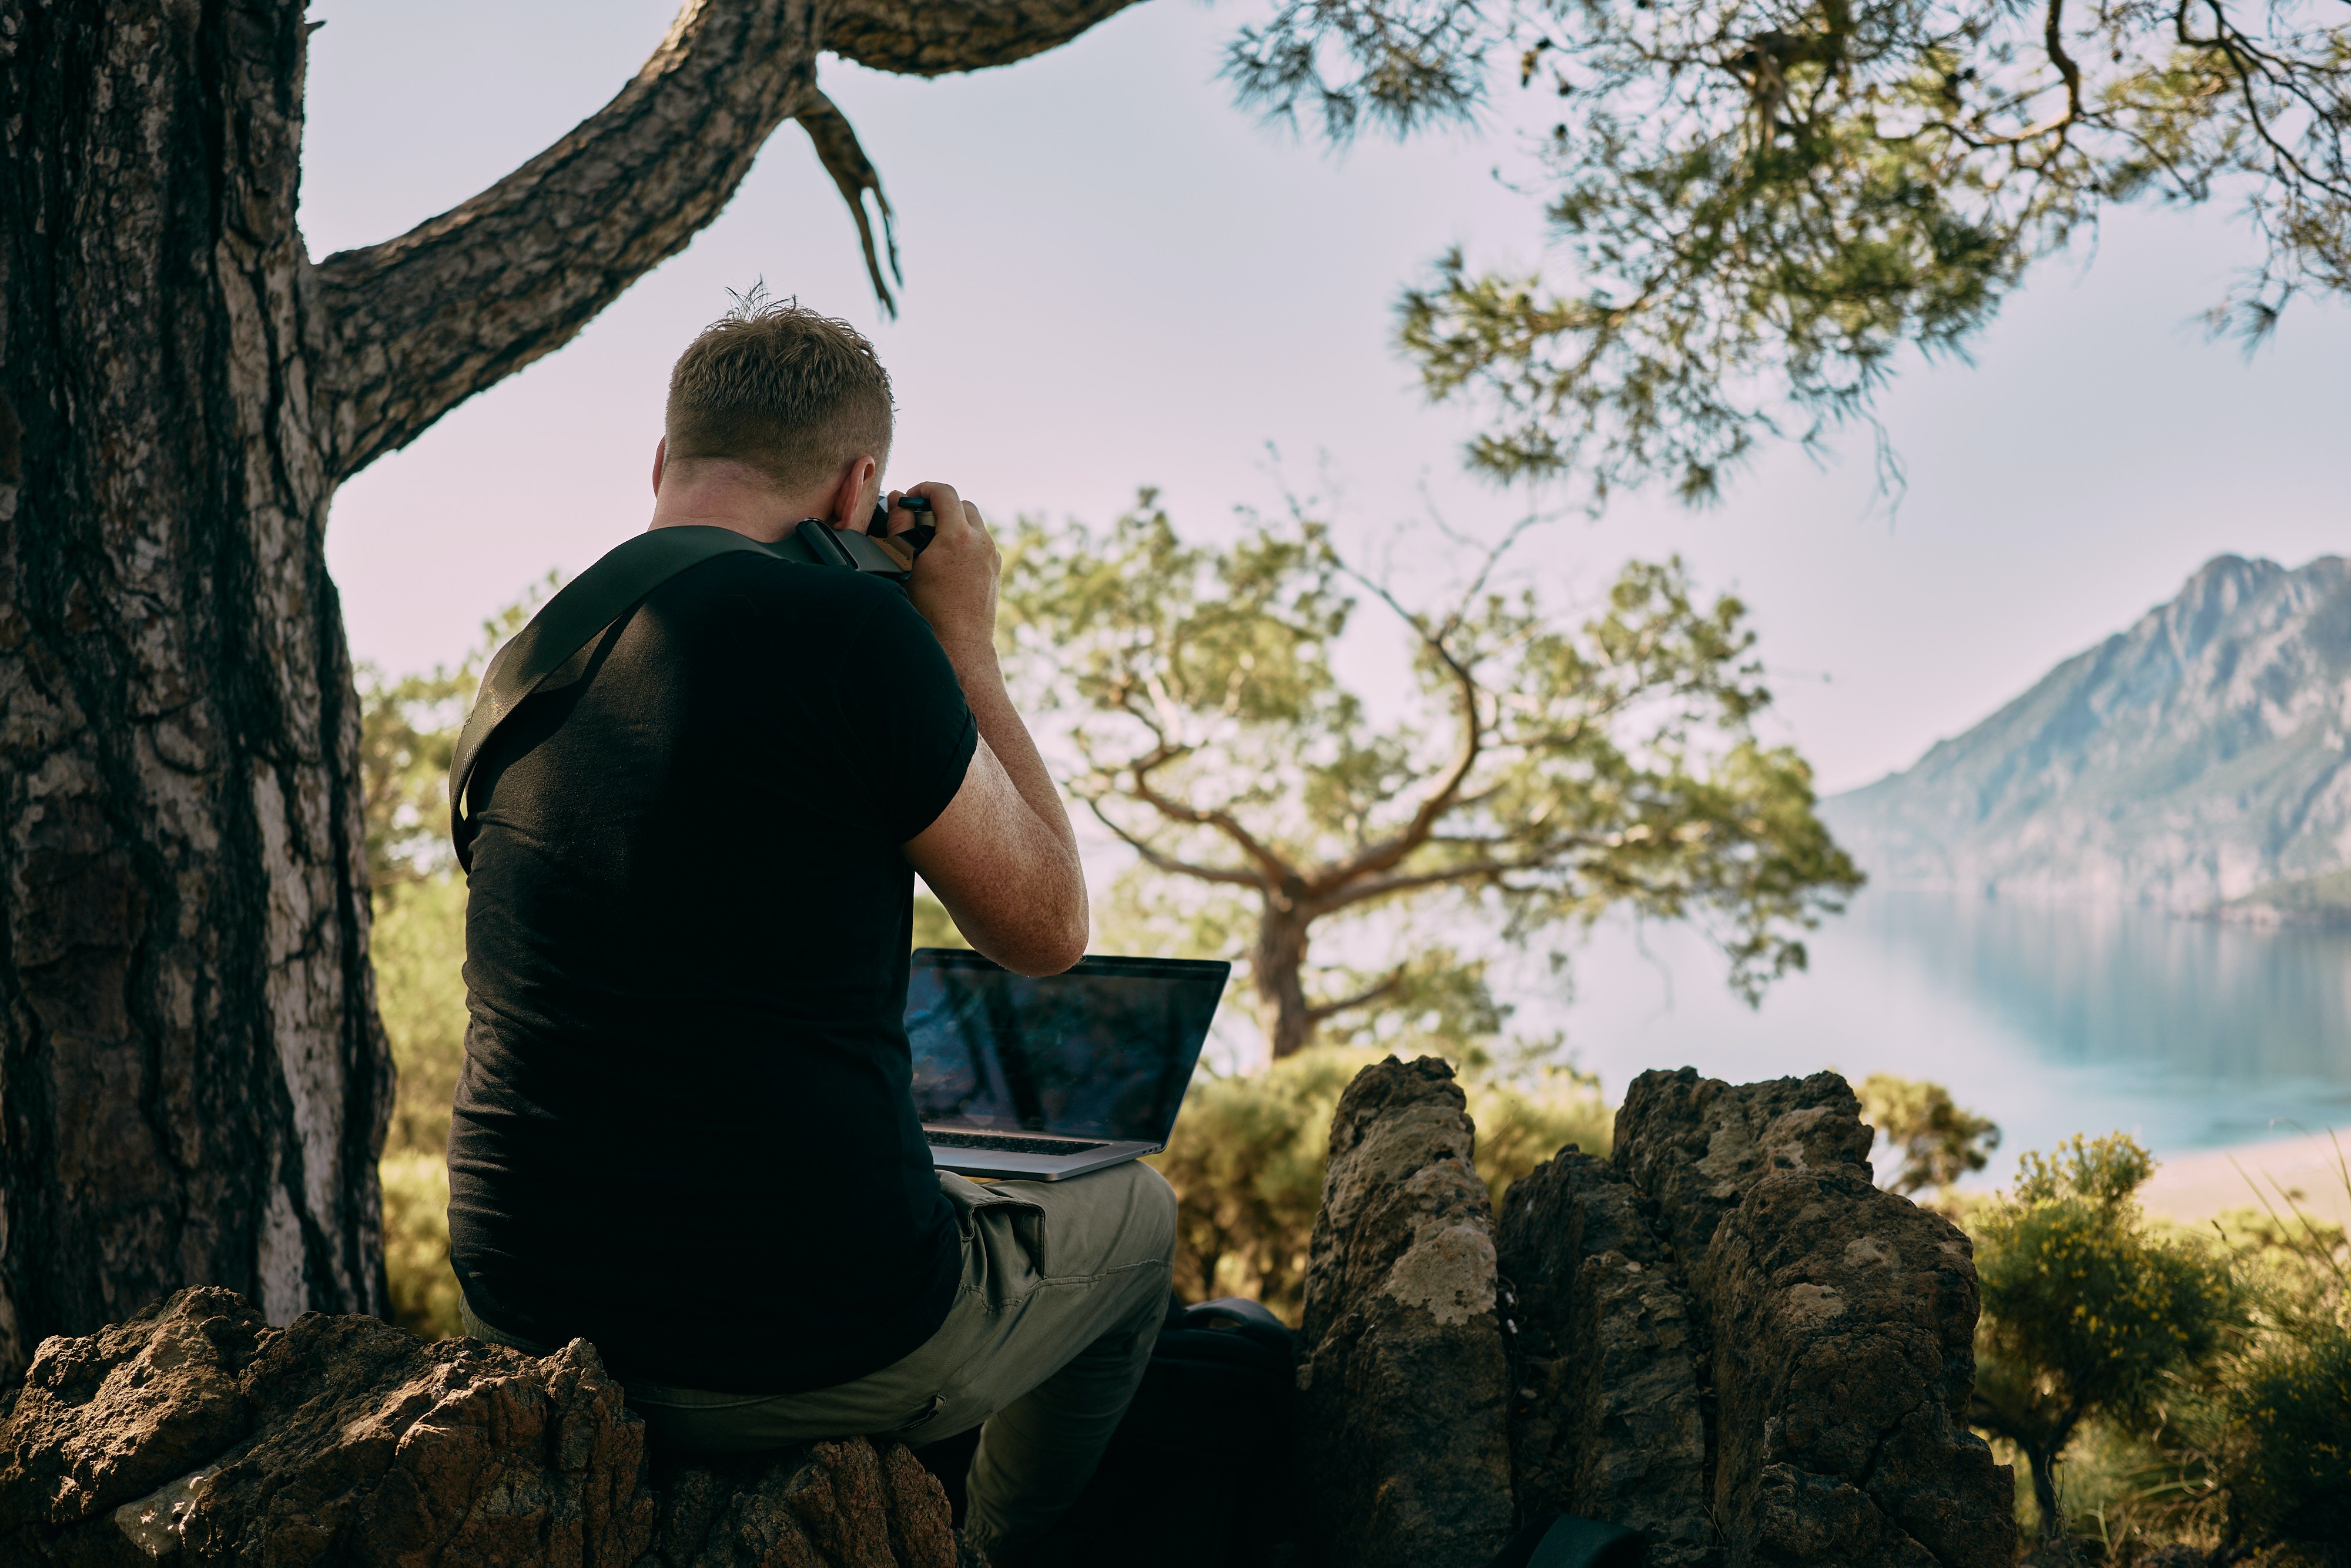 Man sitting on rock taking a picture, laptop on lap